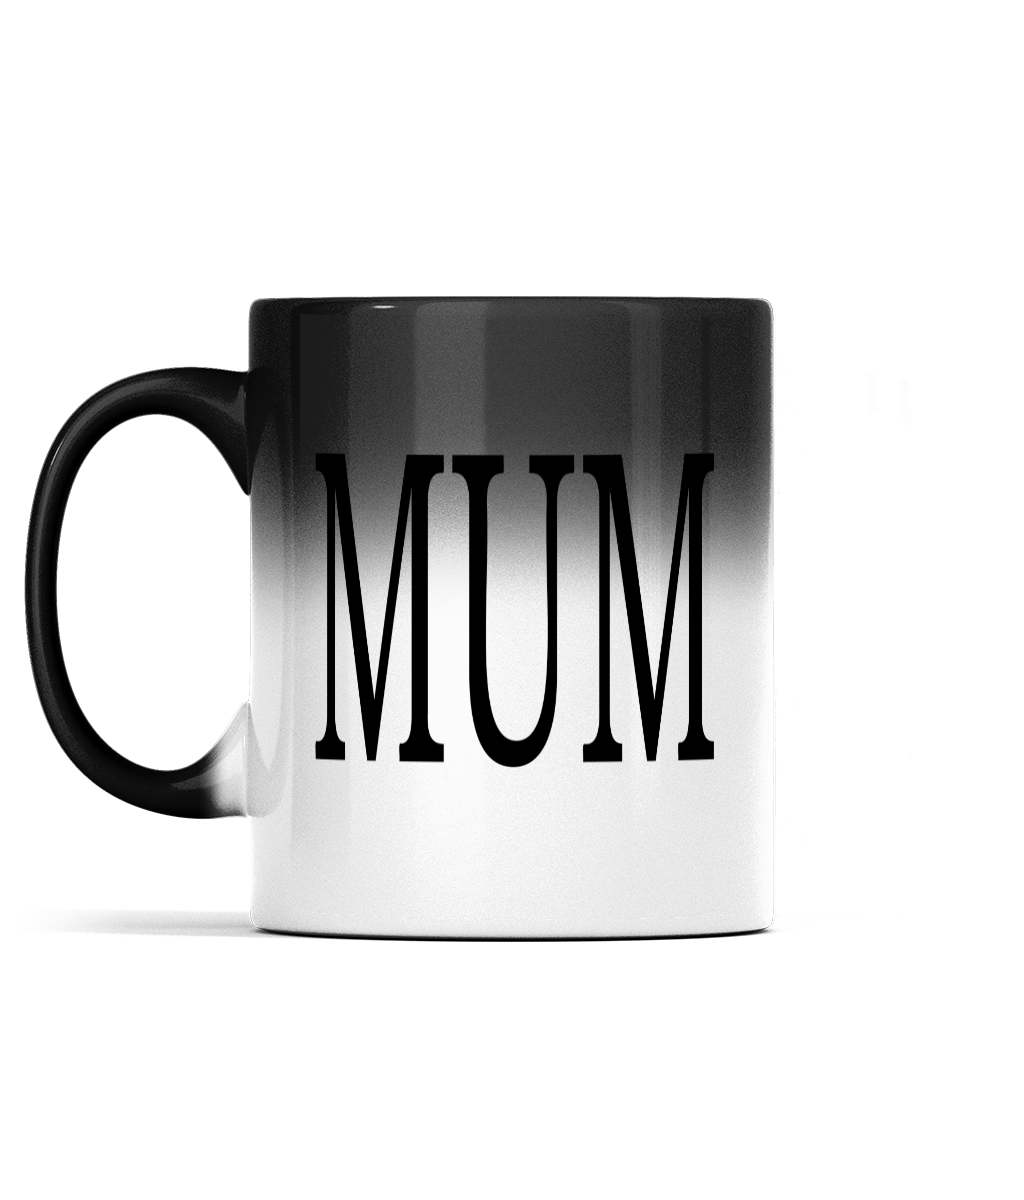 11oz MUM Colour Changing Mug For Tea, Coffee Or Hot Drinks Black Colour When Cold MUM Appears And Turns To White Ceramic Tea Cup When Warm